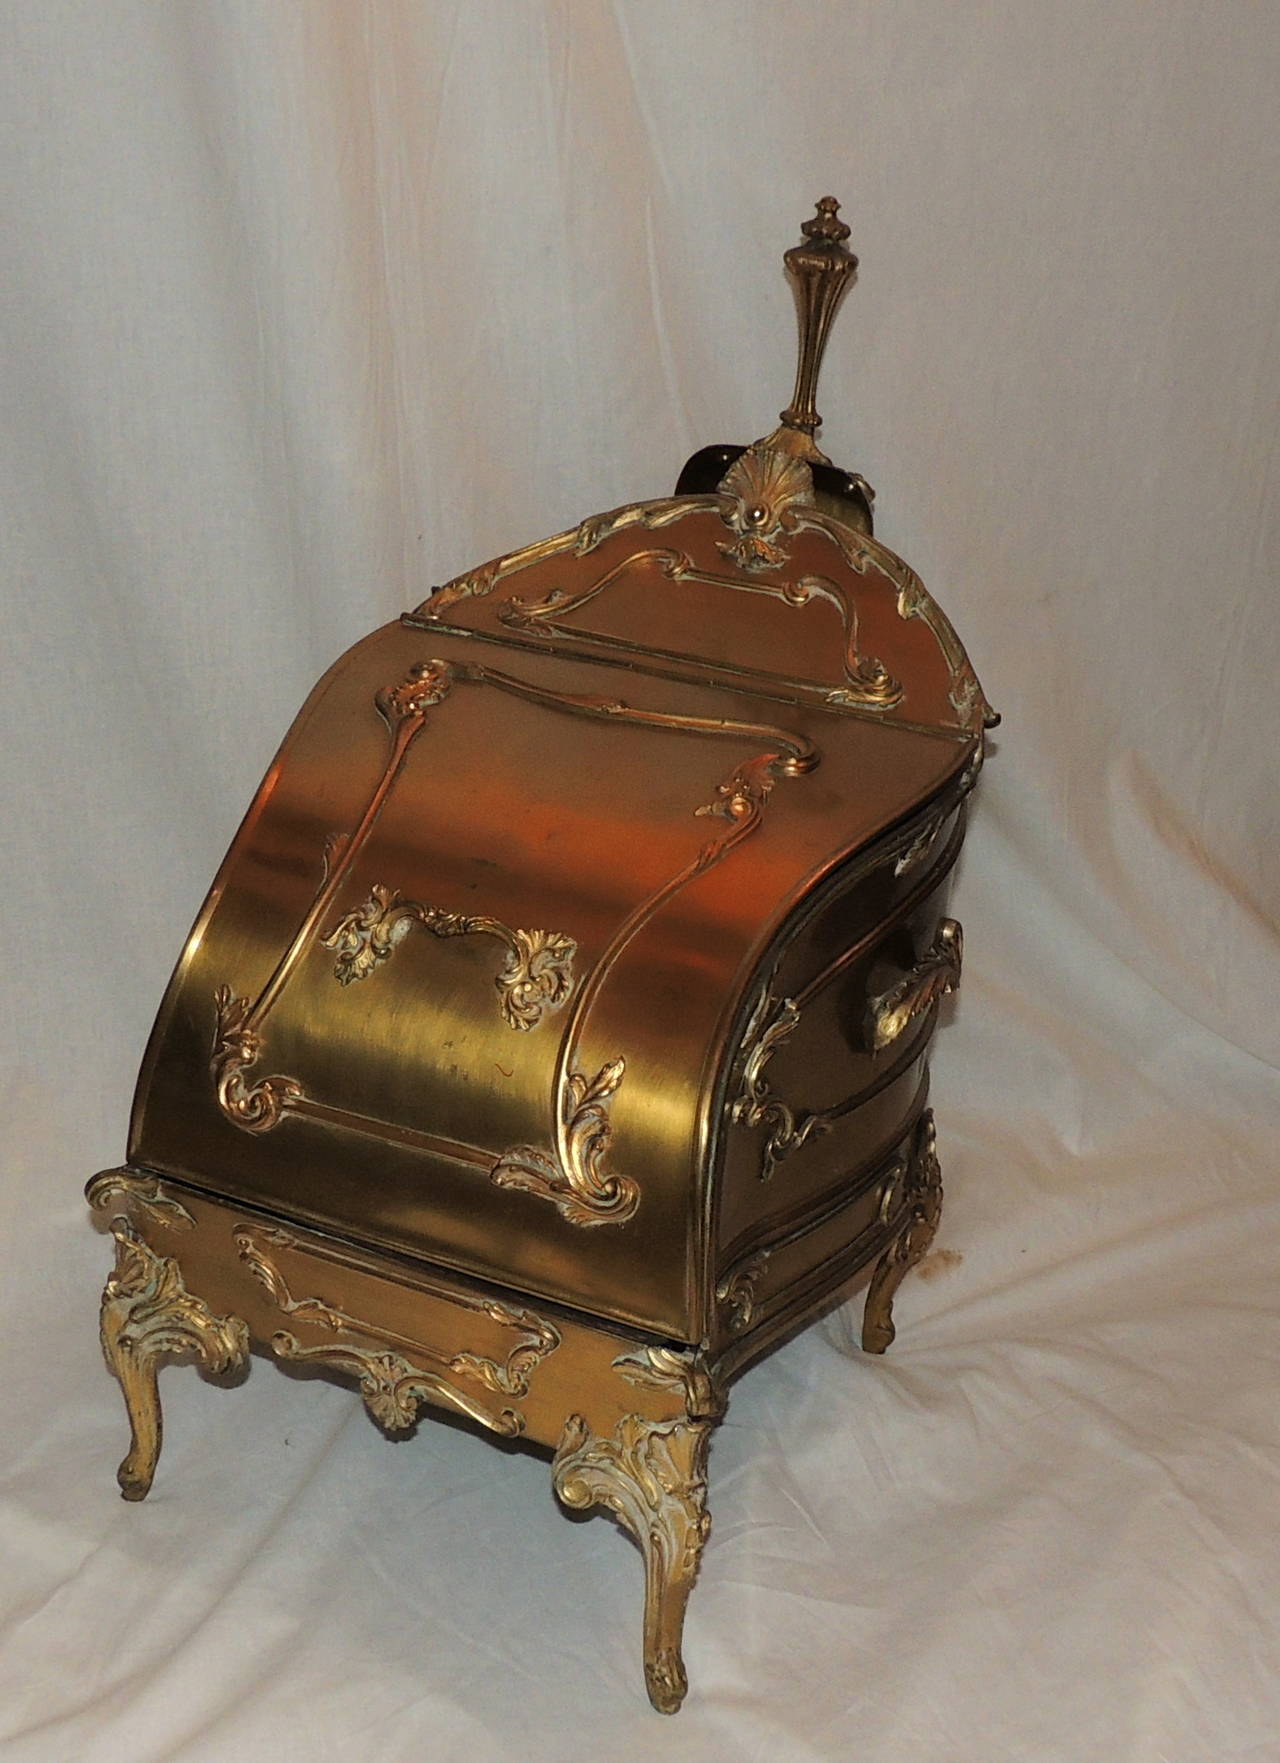 Wonderful scroll details decorate this beautiful bronze coal box with original matching decorated shovel.  From the scroll entwined legs, the hatch opens to reveal the original removable insert. Closed, the box has a elegant appearance, perfect as a